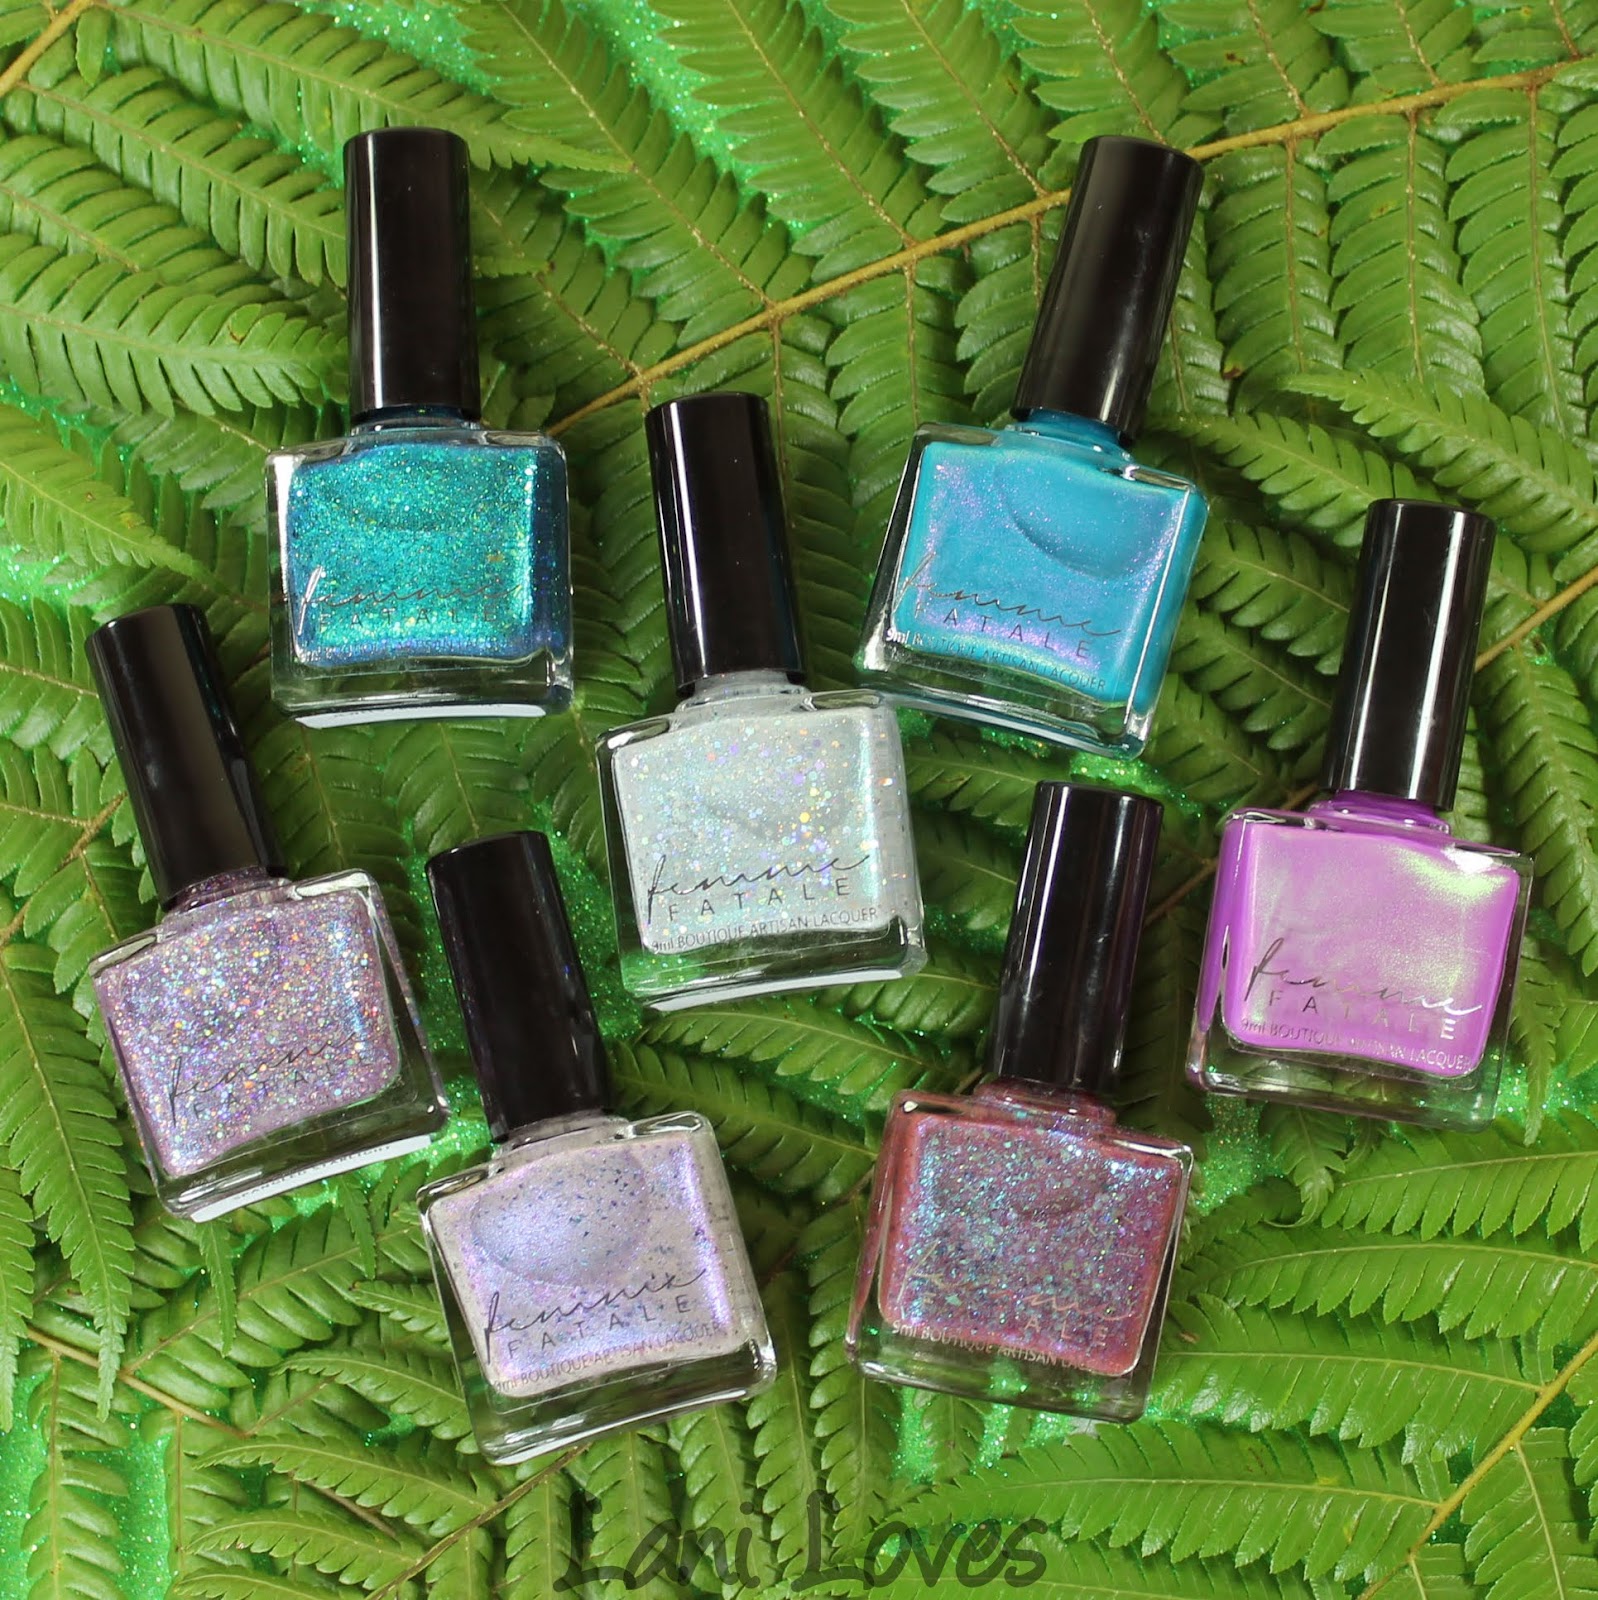 Femme Fatale Cosmetics Midsummer Night's Dream Collection Swatches ...